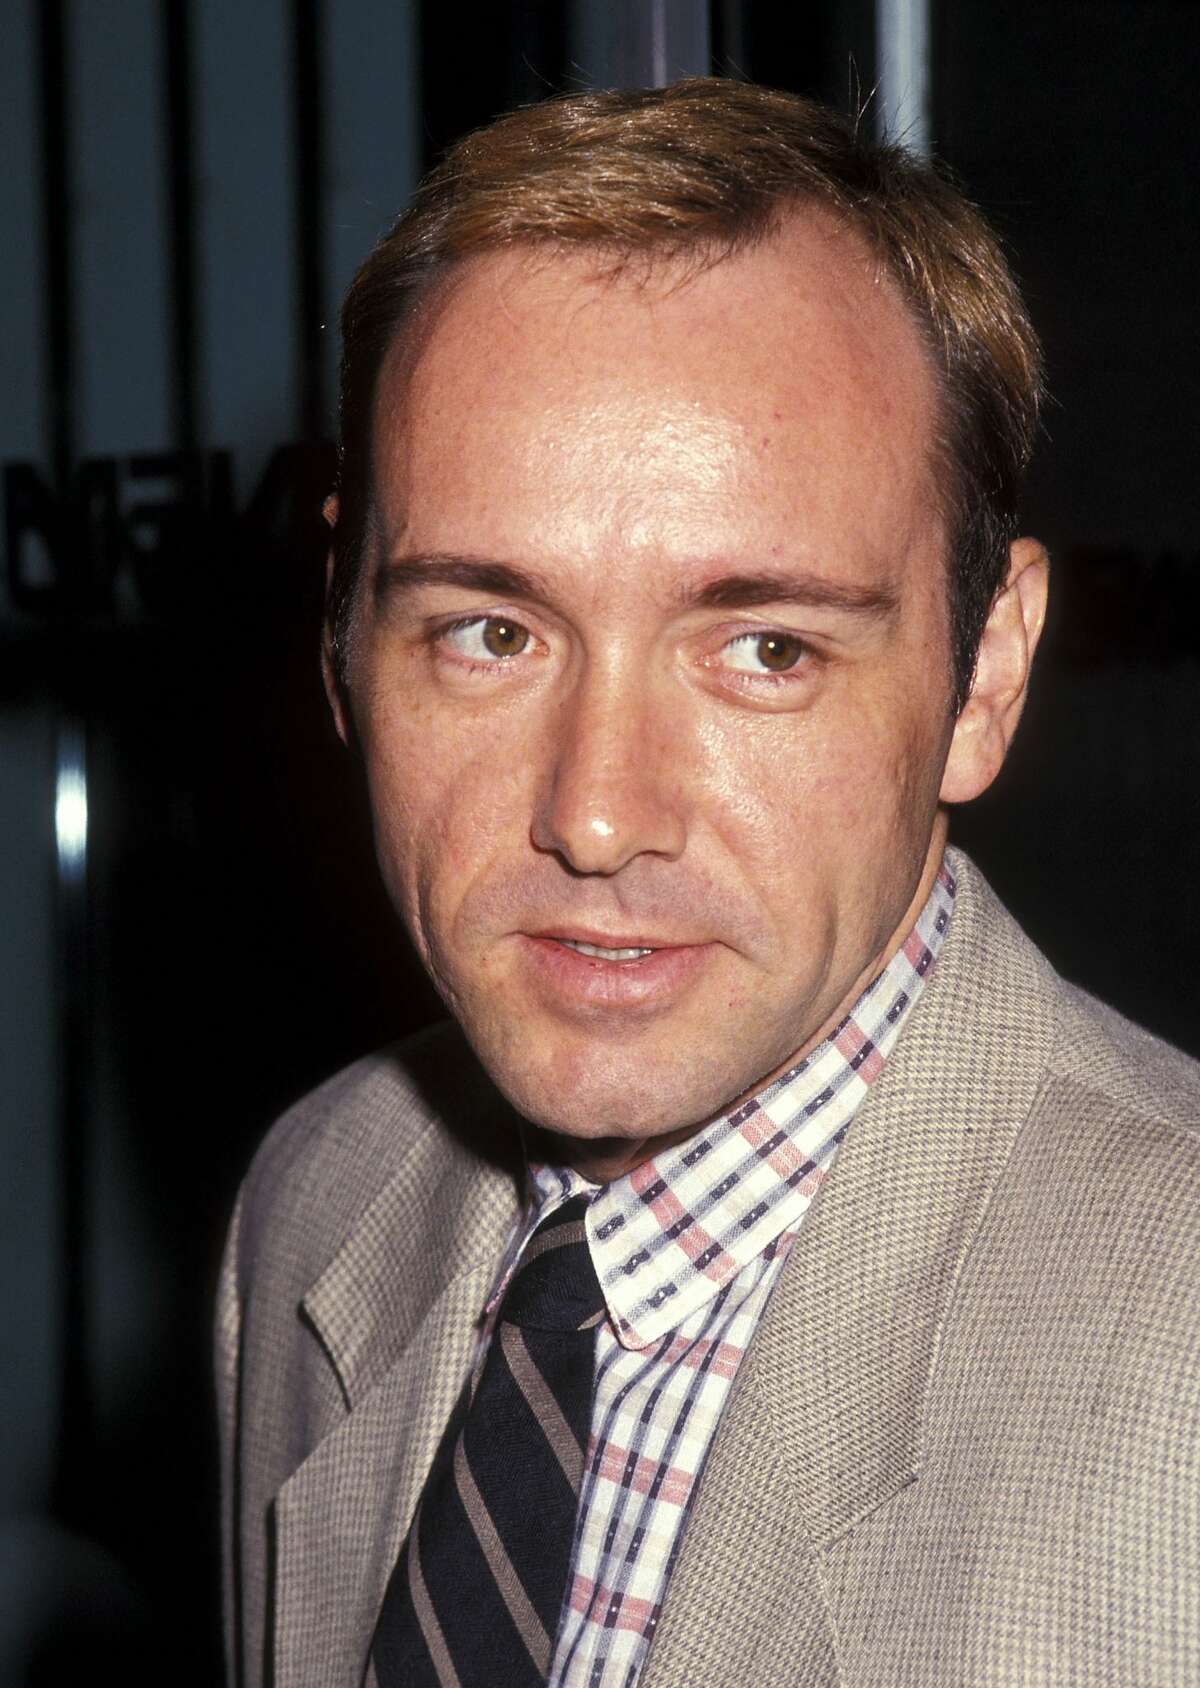 Actor Kevin Spacey attends the "Afraid of the Dark" New York City Premiere on July 21, 1992 at City Cinemas in New York City.